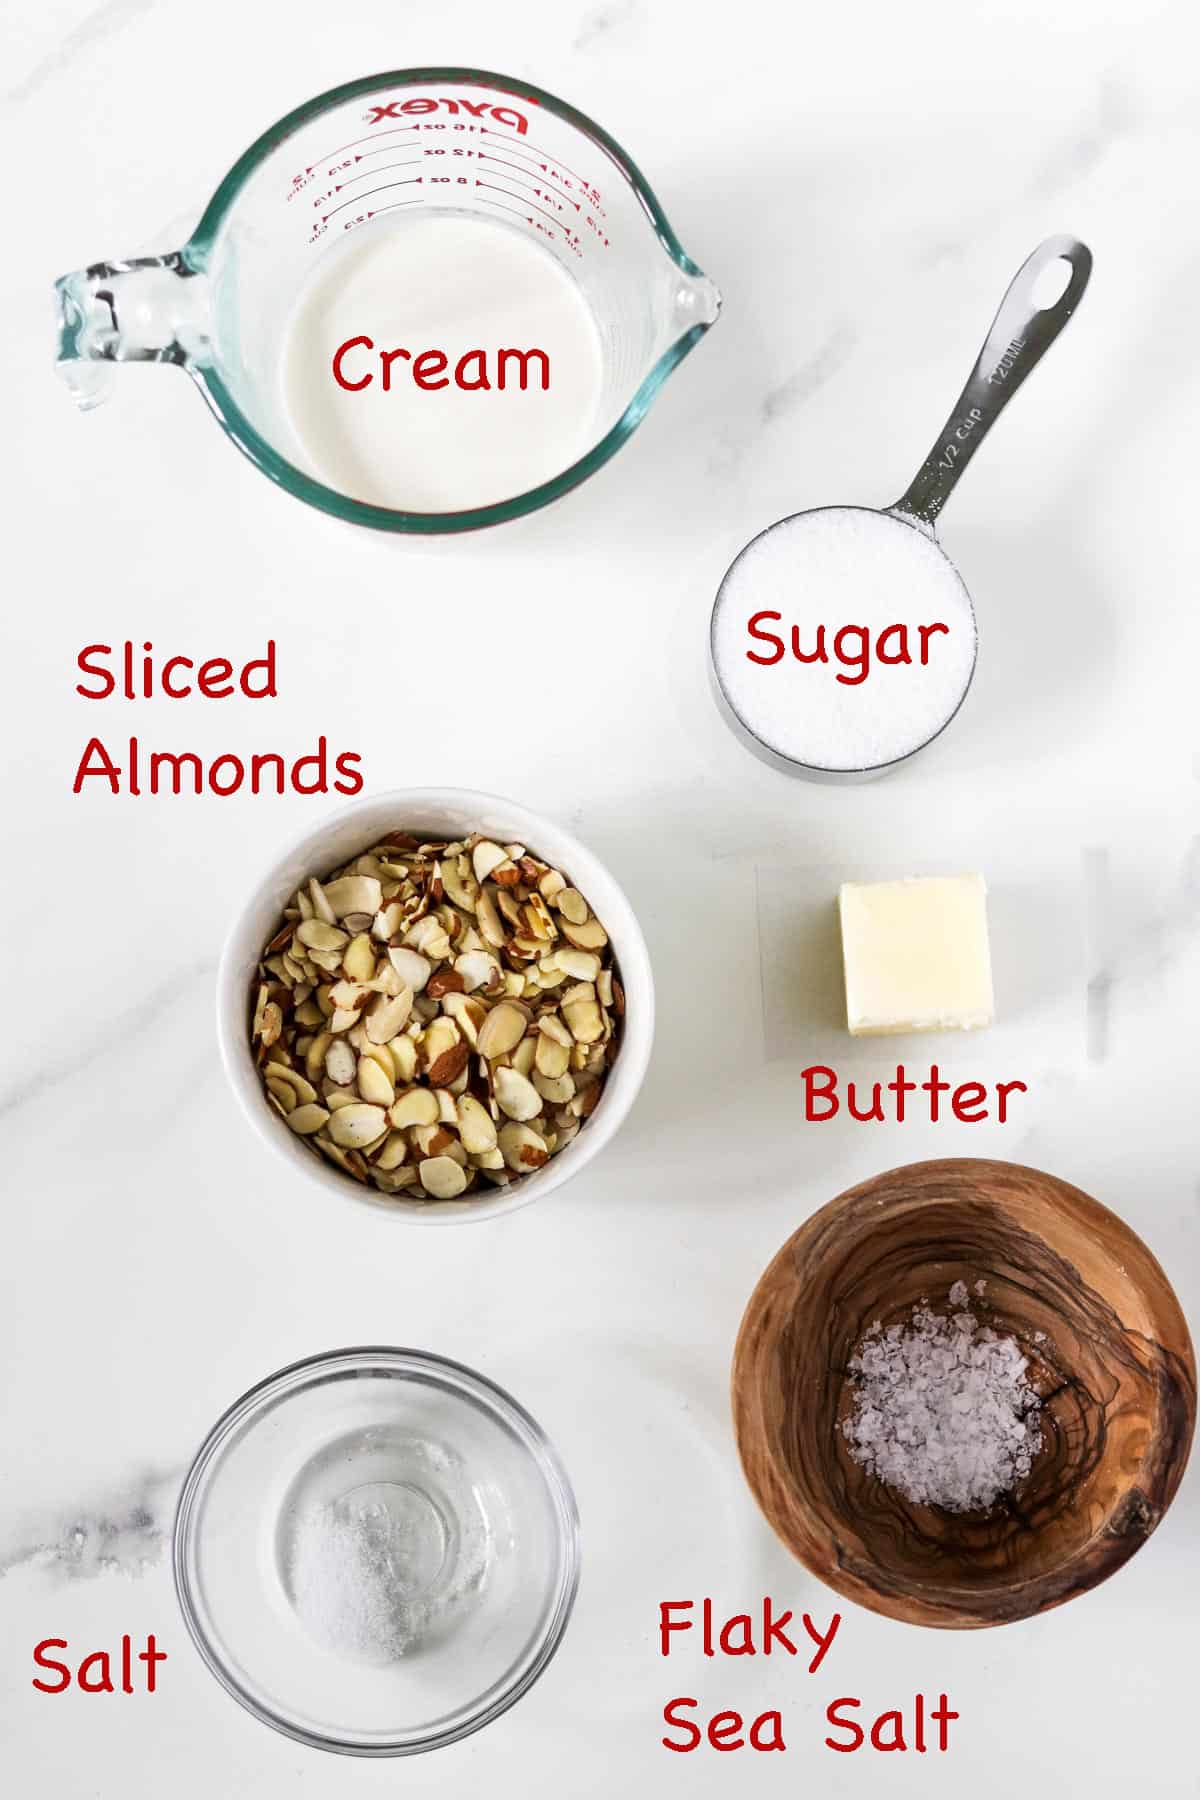 Labeled ingredients for Swedish Tosca Cake Topping.